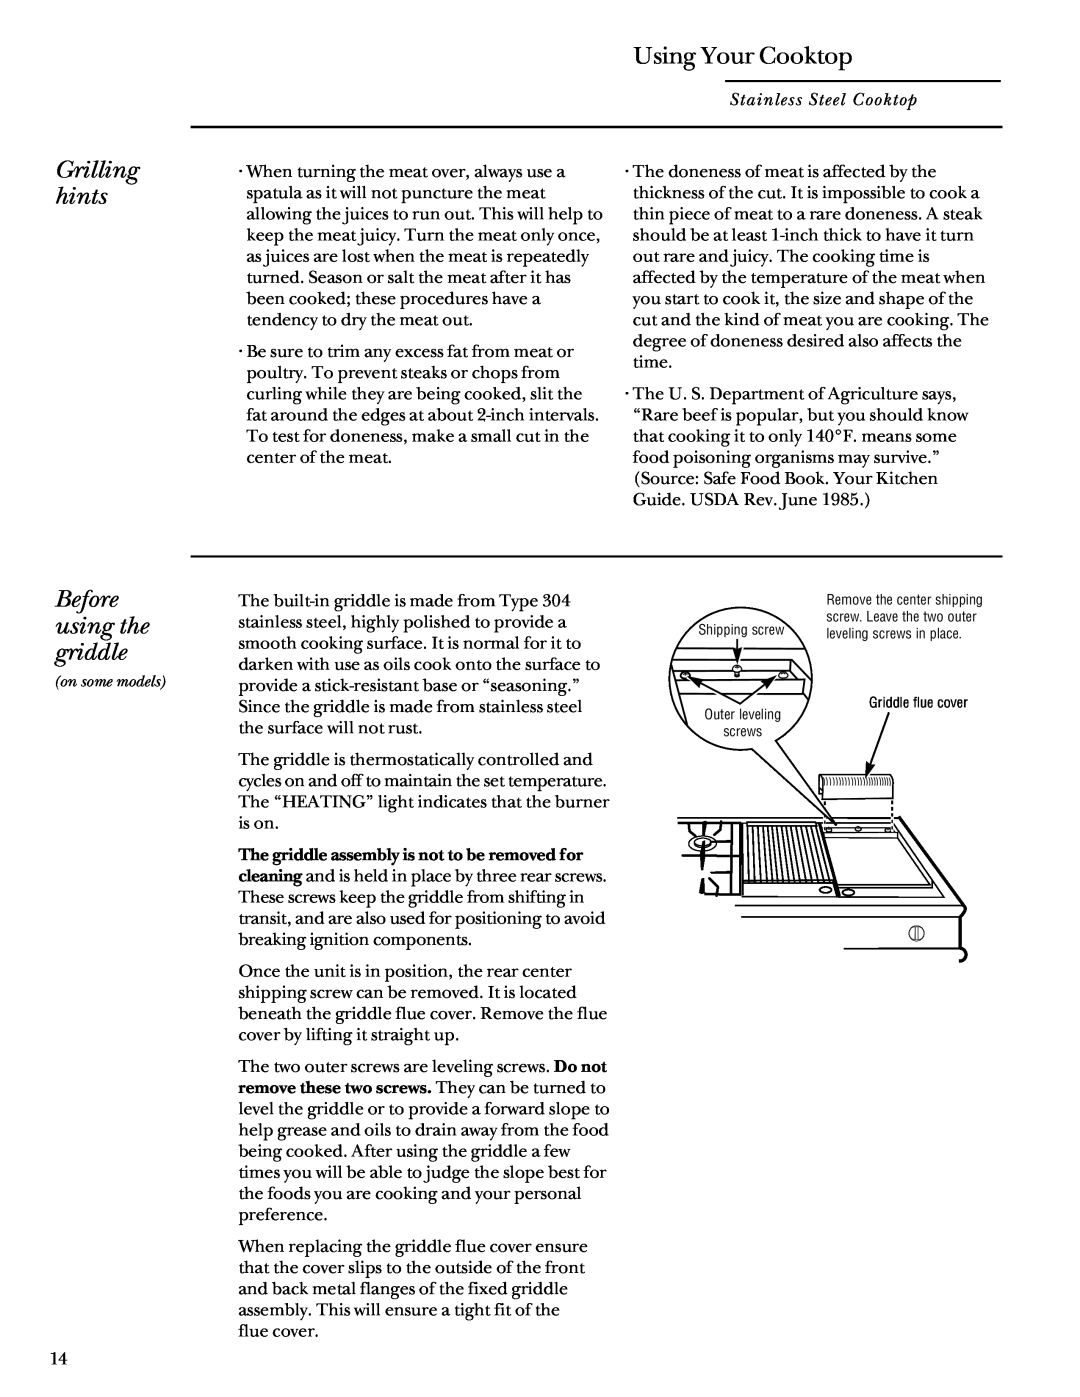 GE Monogram 164D3333P027 manual Grilling hints, Before using the griddle, Using Your Cooktop, Griddle flue cover 